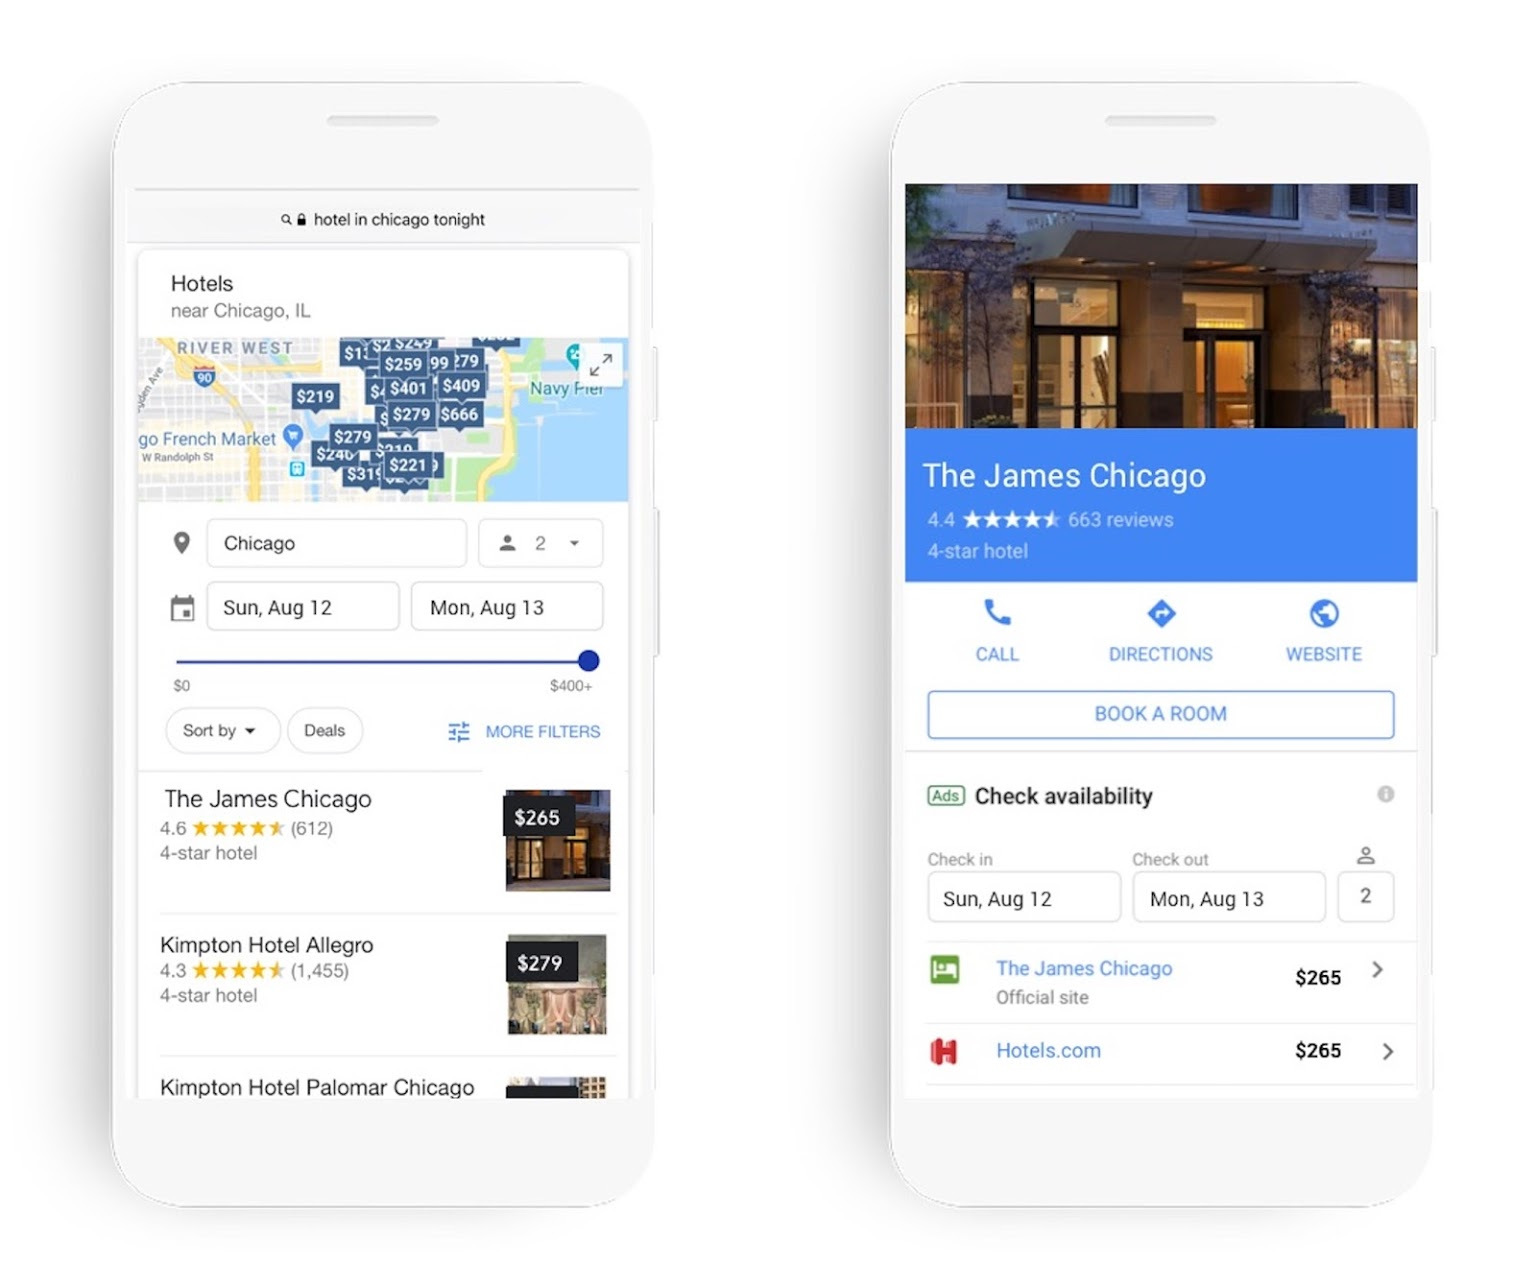 Google Hotel Ads. List Your Vacation Rentals‎ Official Site | Guide To Google Hotel Ads‎ Drive Bookings with Ads for Your Hotel Front Desk Reservation Calendar Drag and Drop, for Hotel · Hostel · B&B · Vacation Rental For Independent Properties and Group Hotel Chains